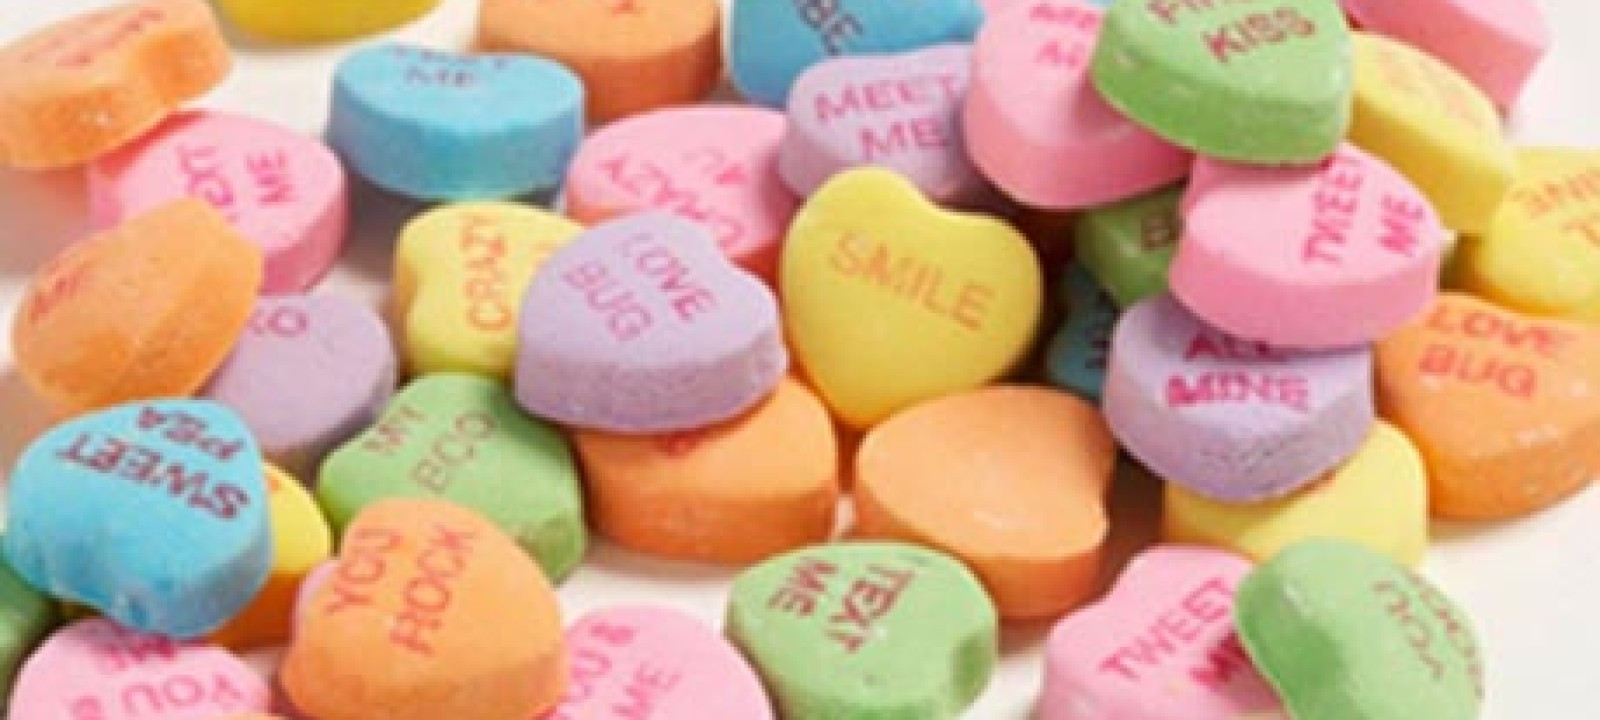 Valentines Day Candy Hearts
 Valentine’s Day American Style Anglophenia